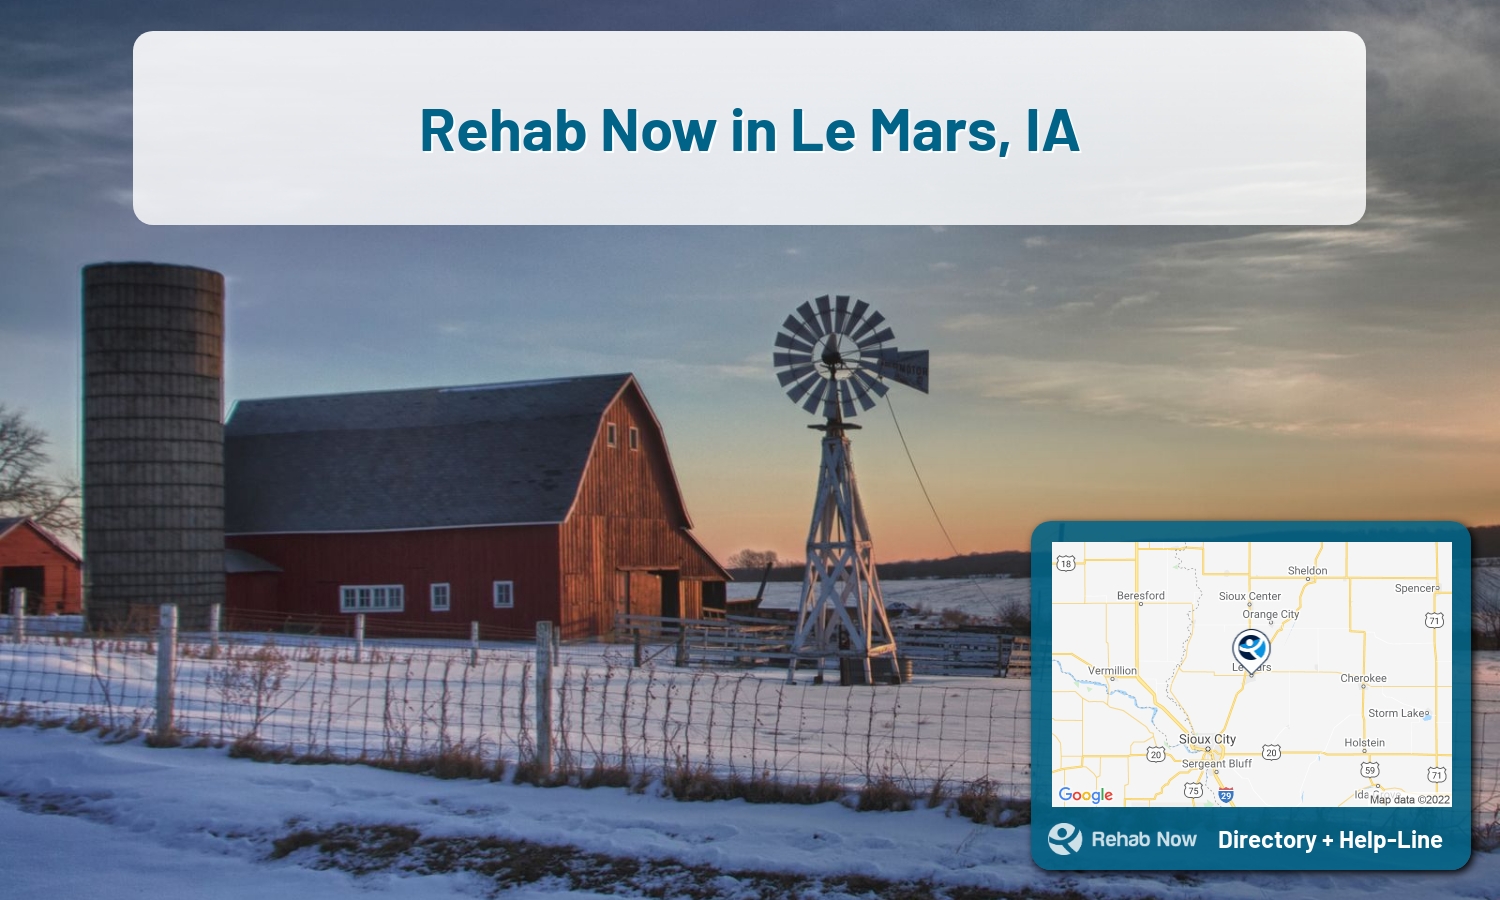 Drug rehab and alcohol treatment services near you in Le Mars, Iowa. Need help choosing a center? Call us, free.